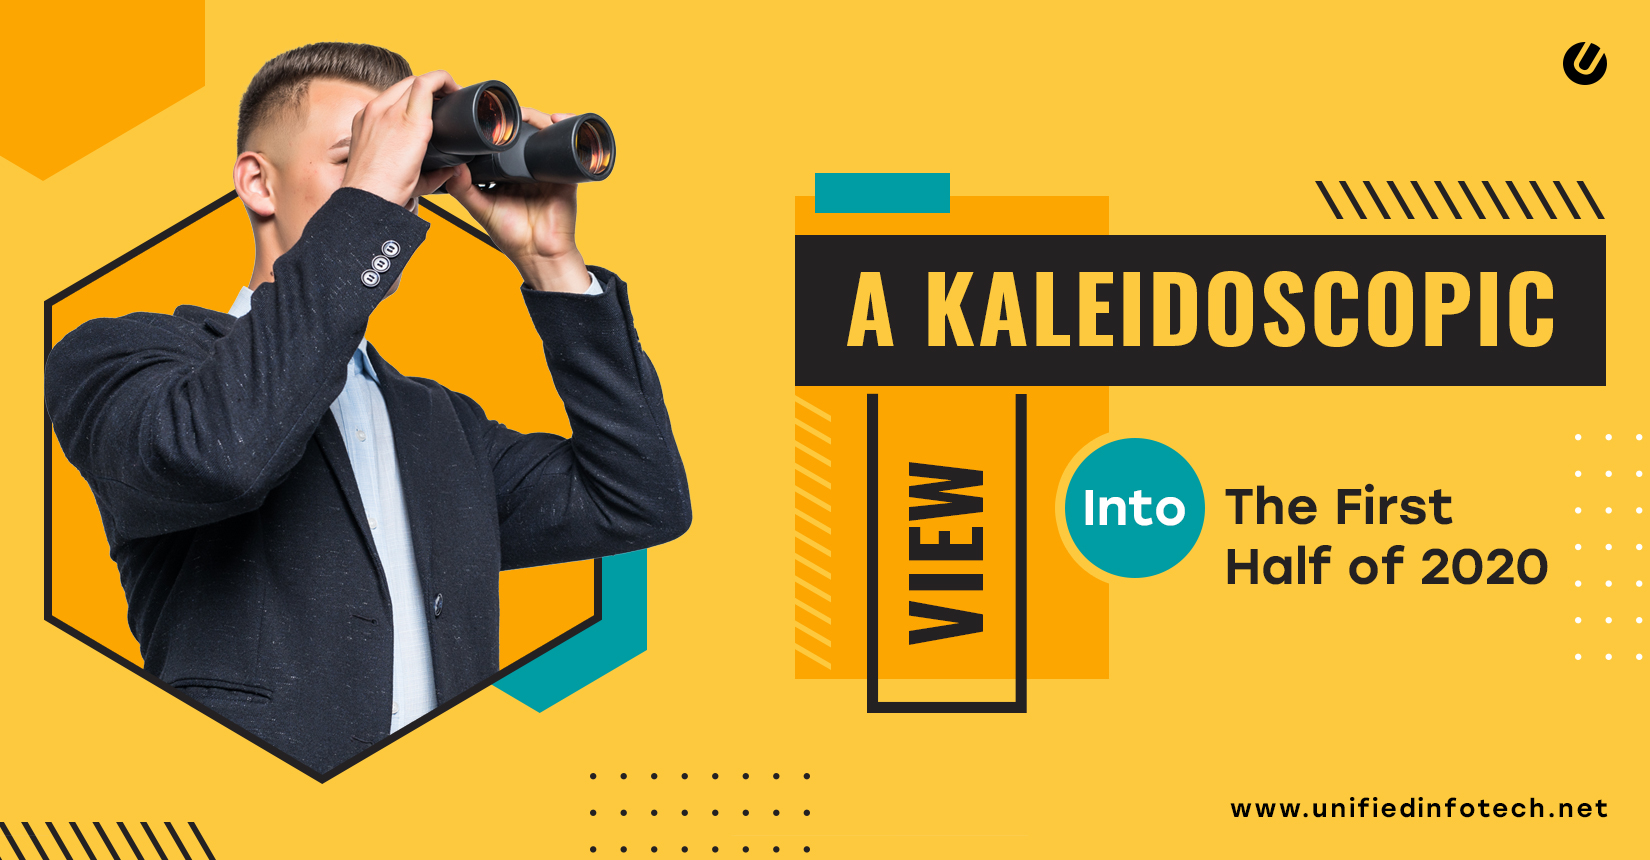 A Kaleidoscopic View Into The First Half of 2020 – The eCommerce Trend